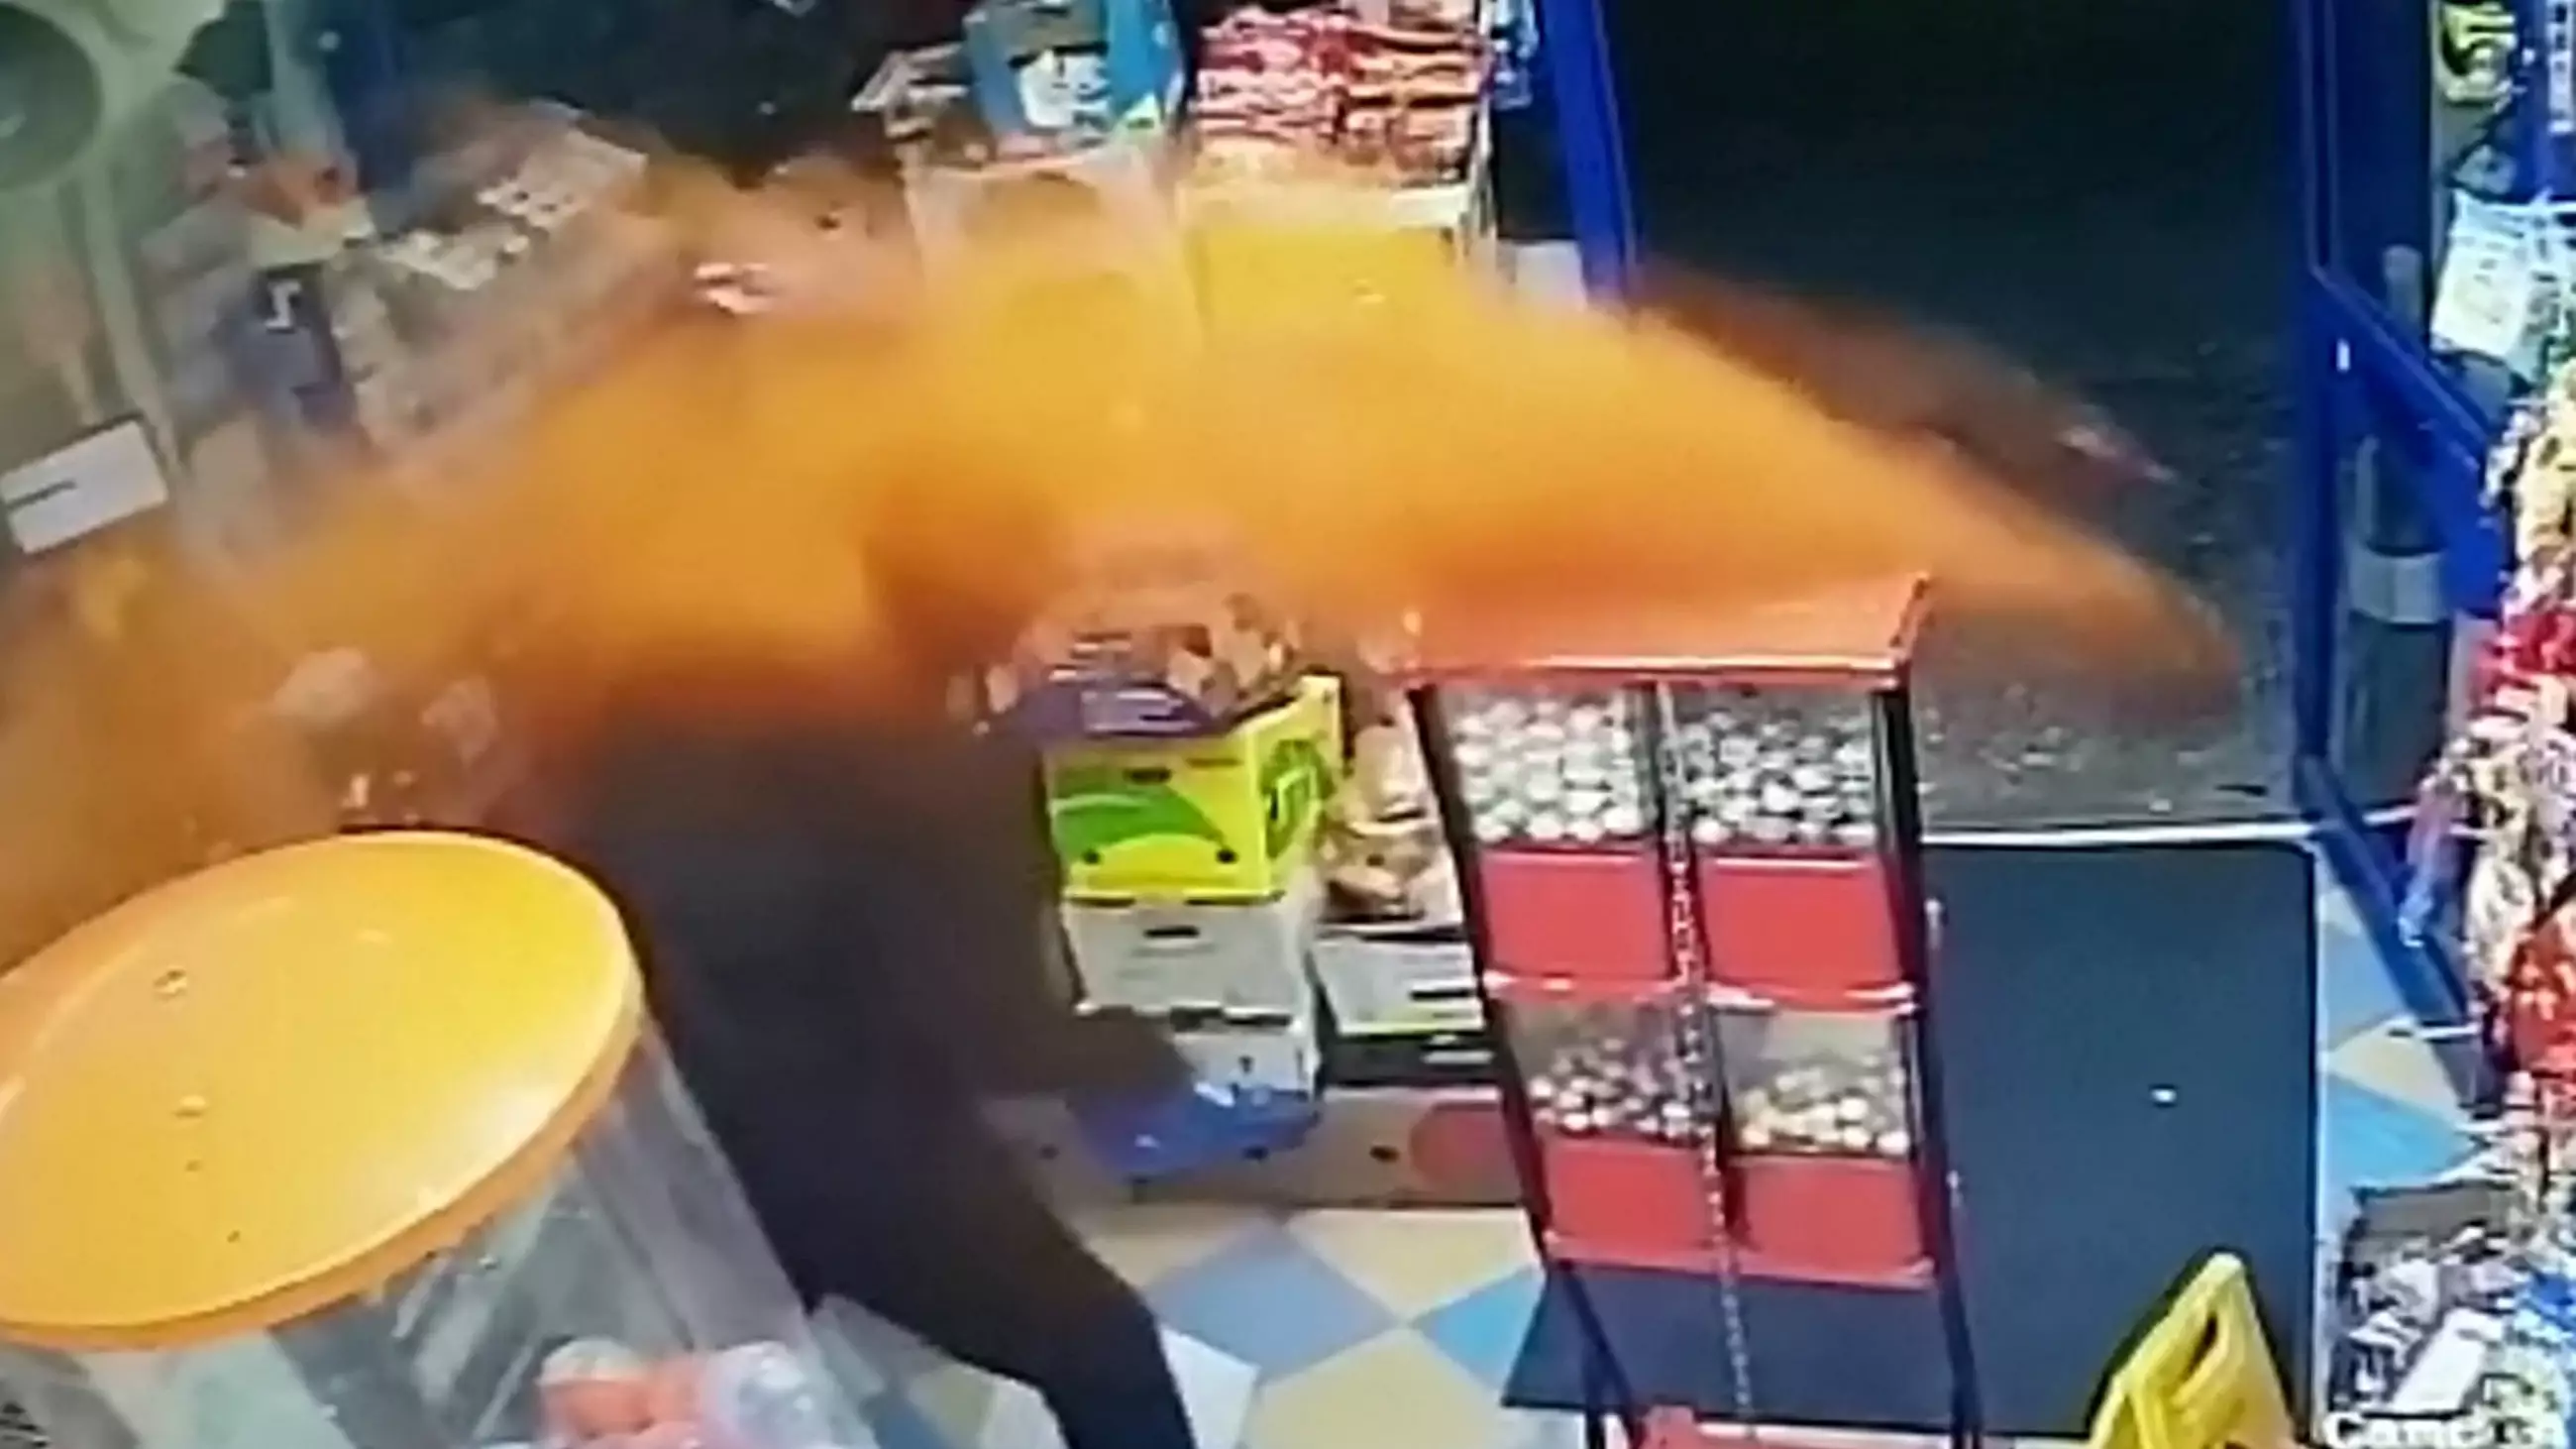 Hero Shopkeeper Sends Knife-Wielding Robber Fleeing After Throwing Chilli Powder In His Face